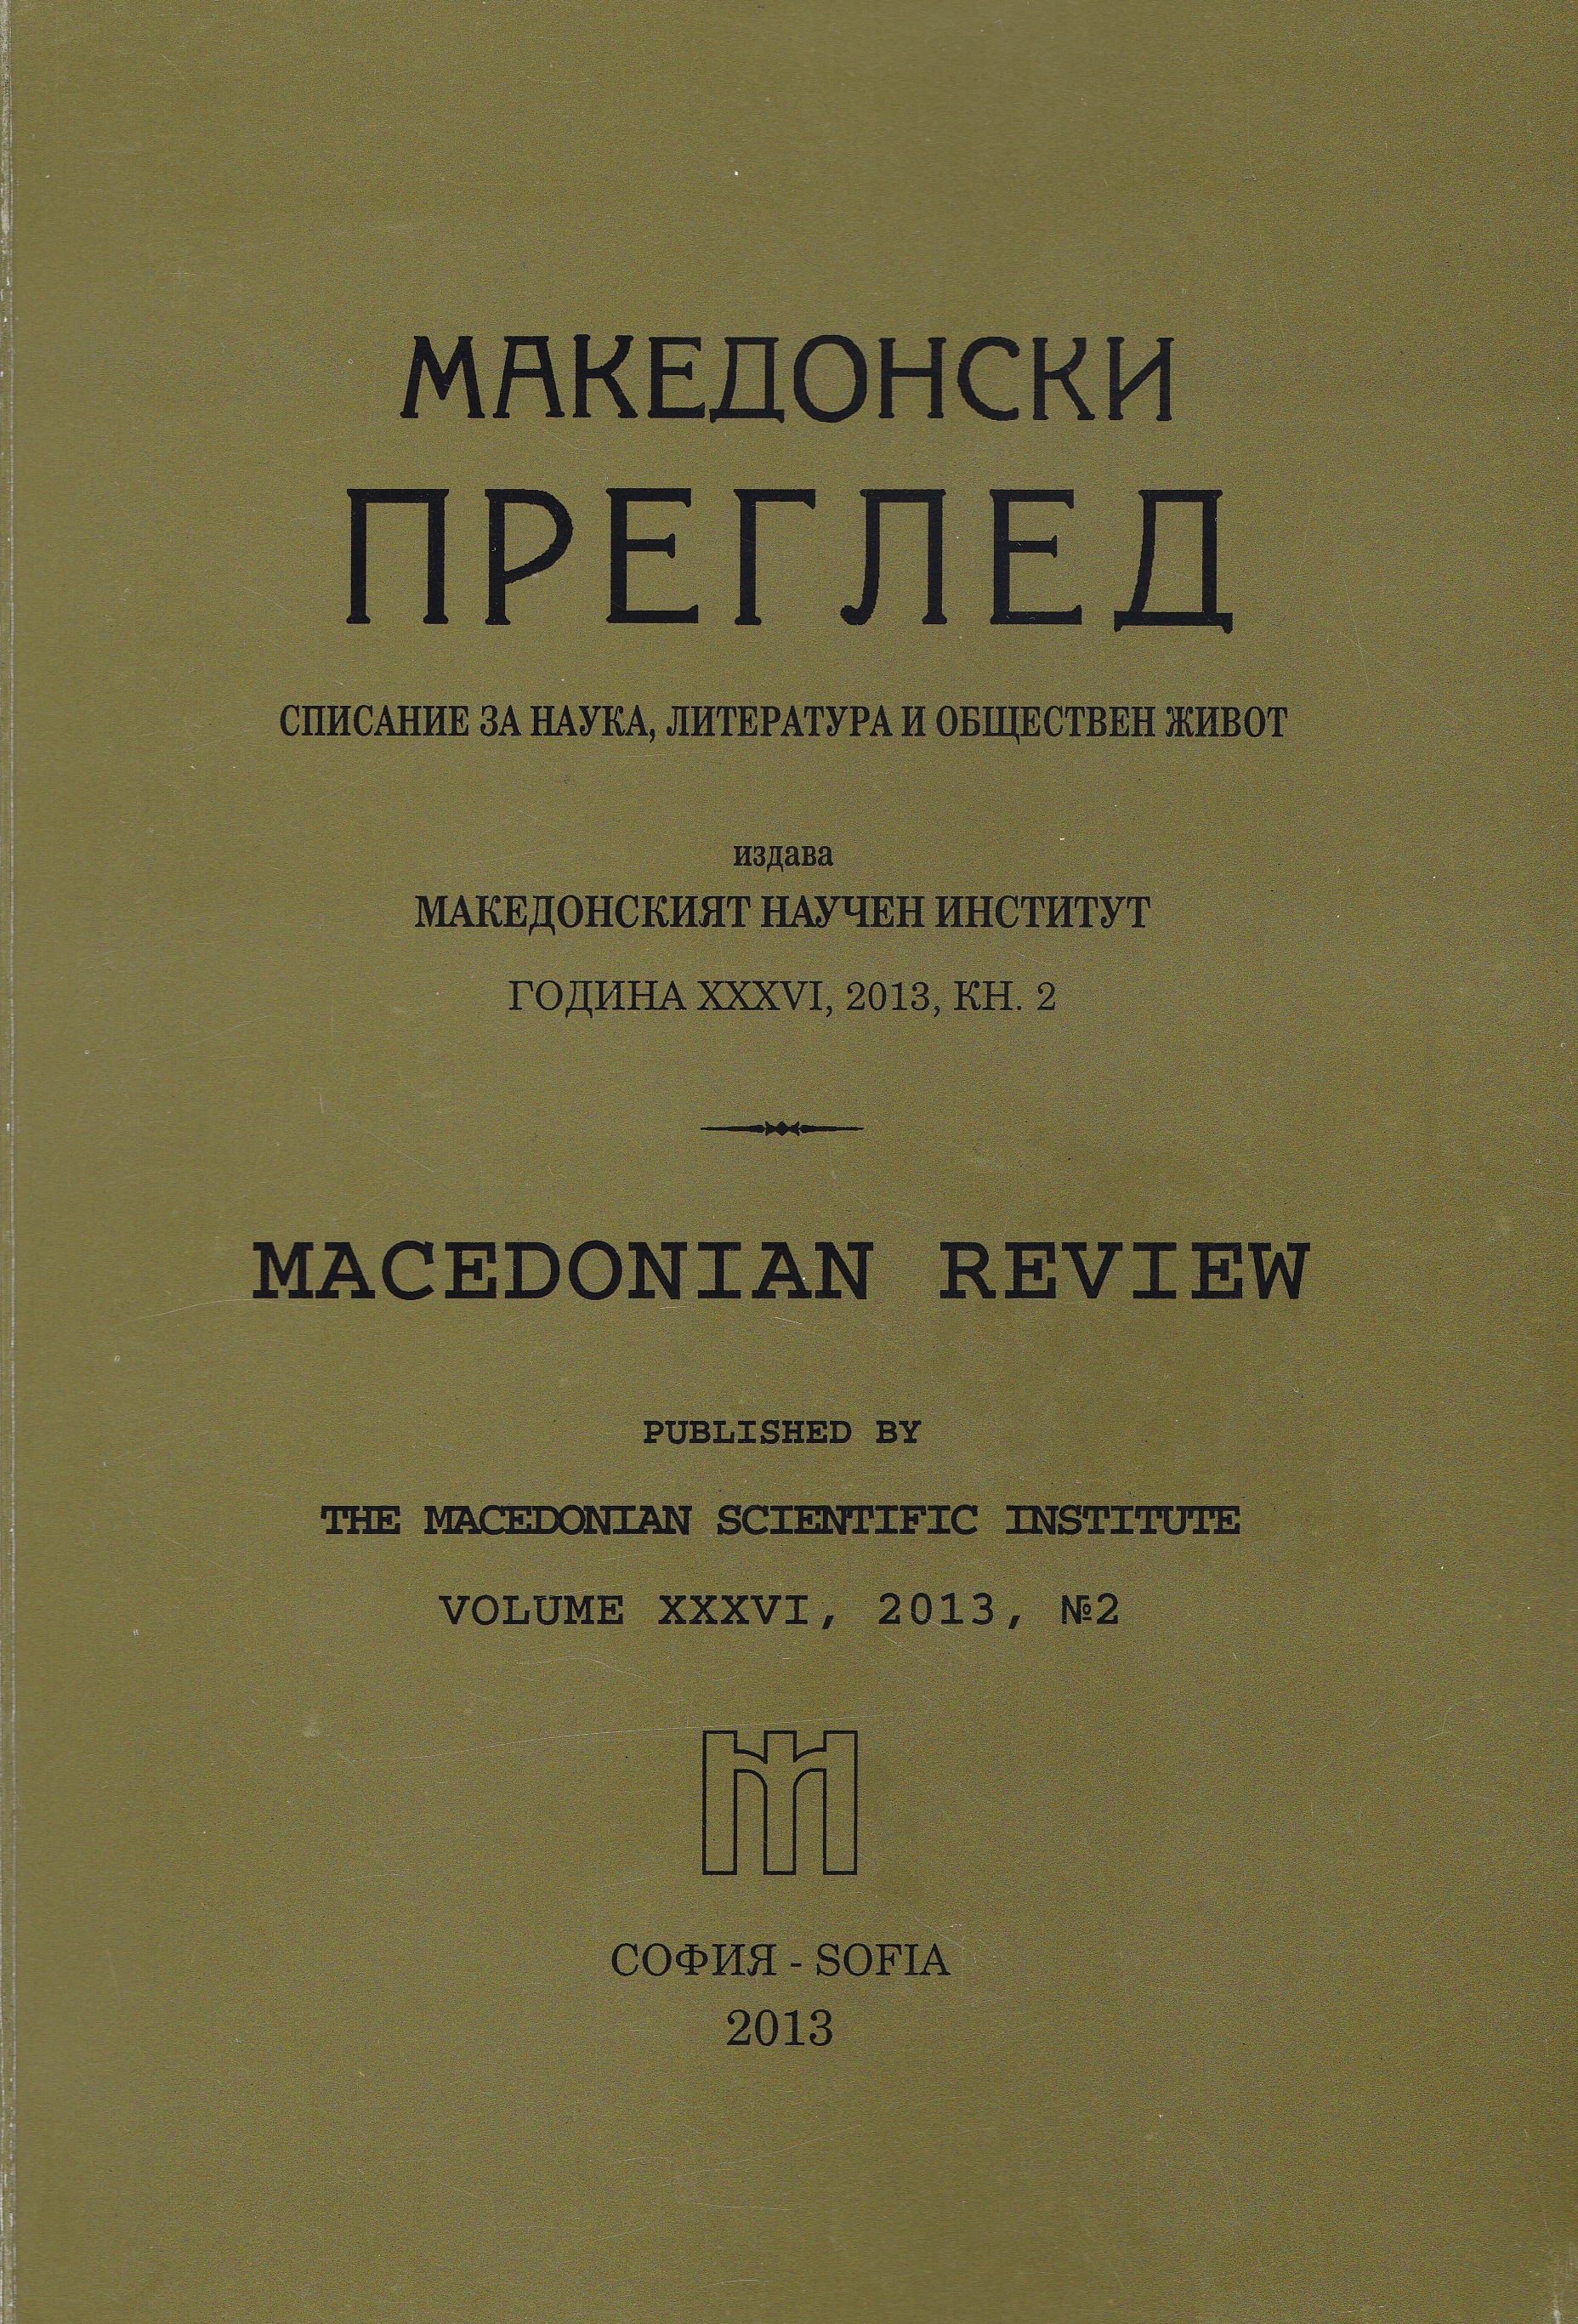 New Releases on the Macedonian issue Cover Image